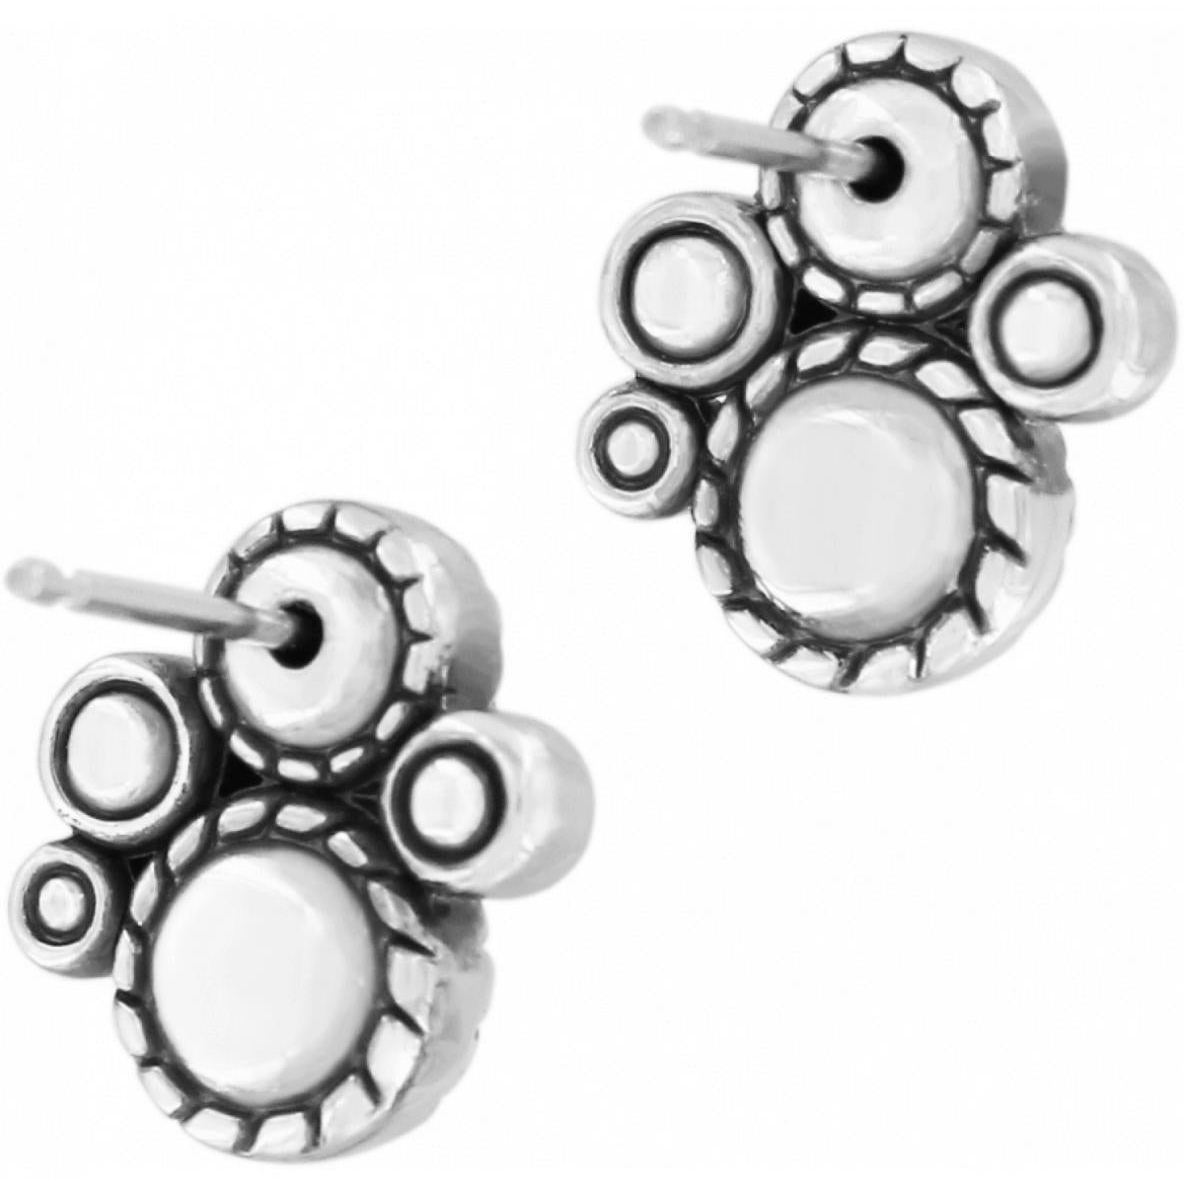 Halo Post Earrings - Zinnias Gift Boutique